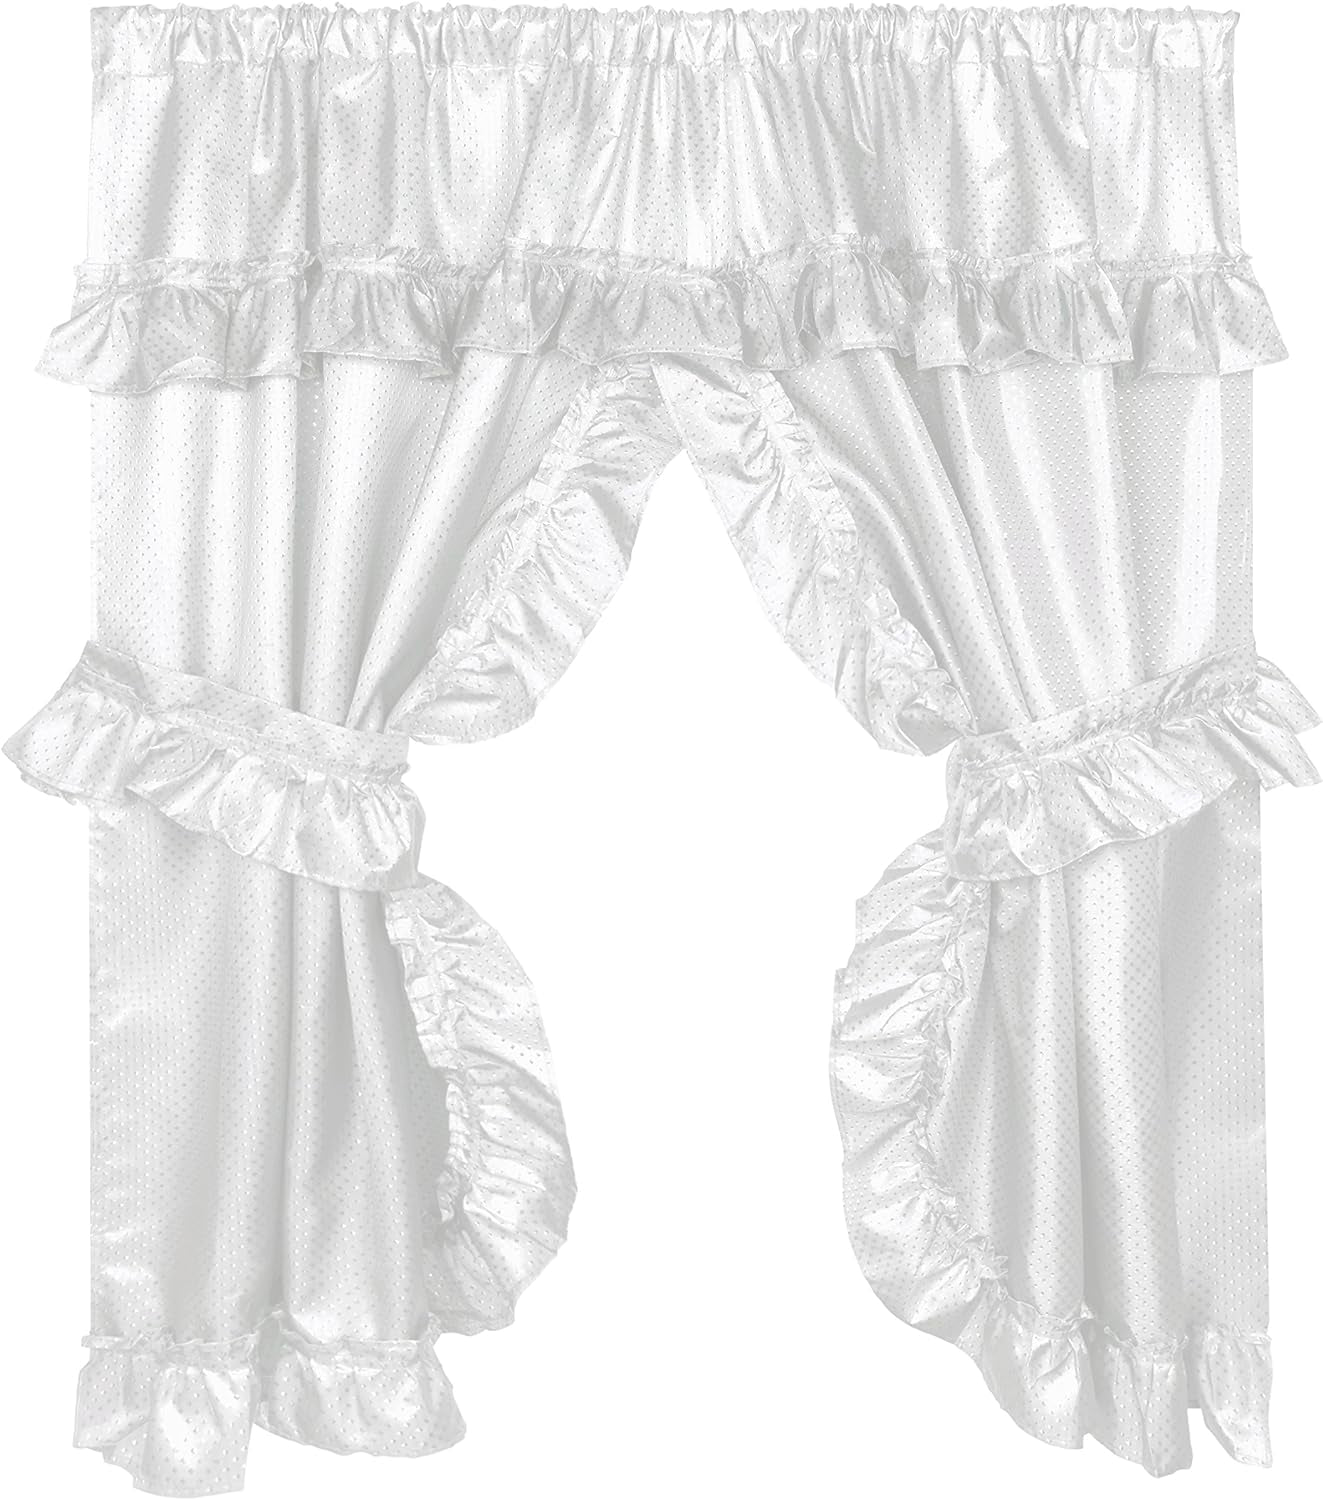 Carnation Home Fashions FWCD-L/16 Lauren Window Curtain with Ruffled Valance, Black  Carnation Home Fashions White  